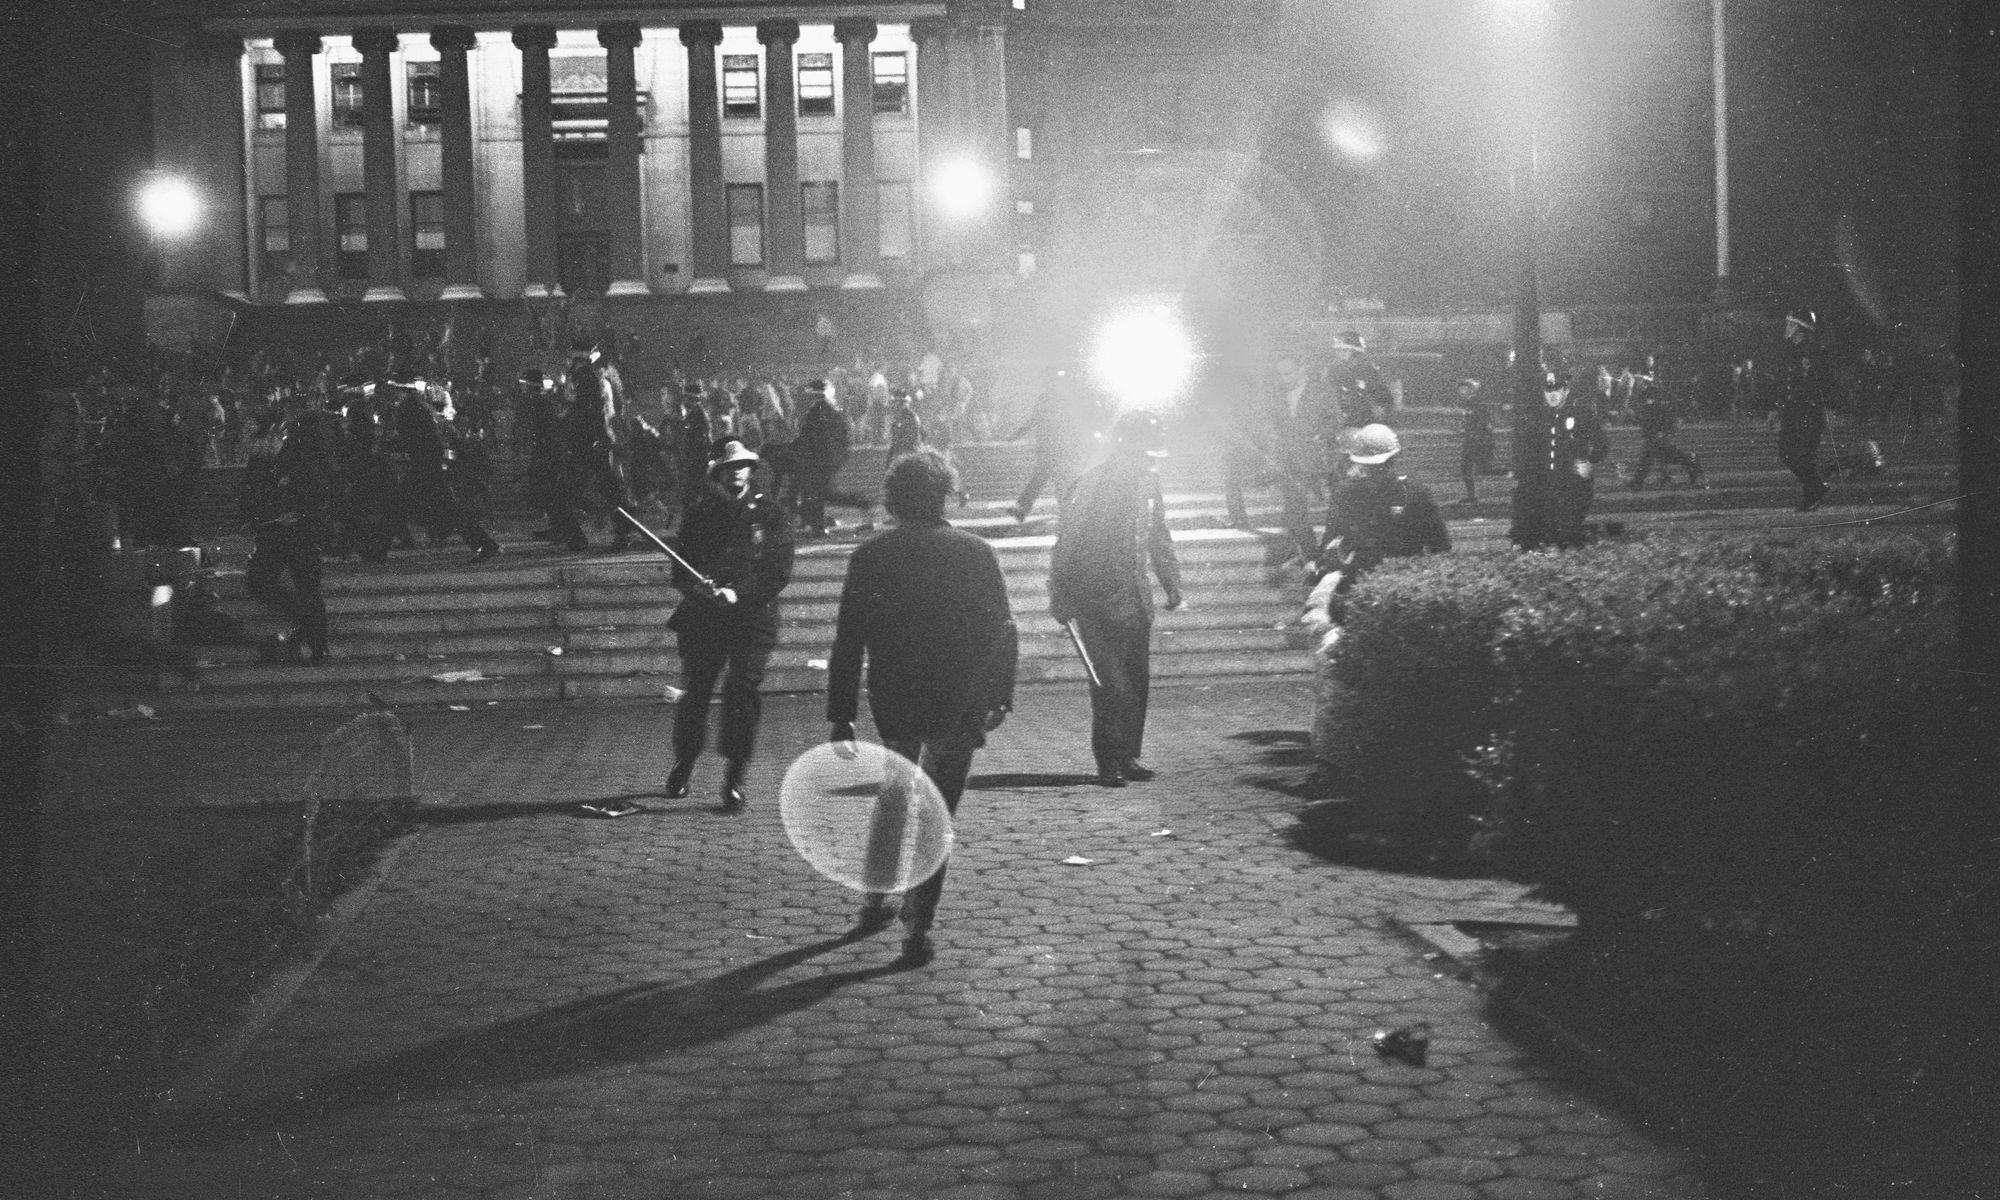 Police clear the Columbia campus, April 30, 1968.